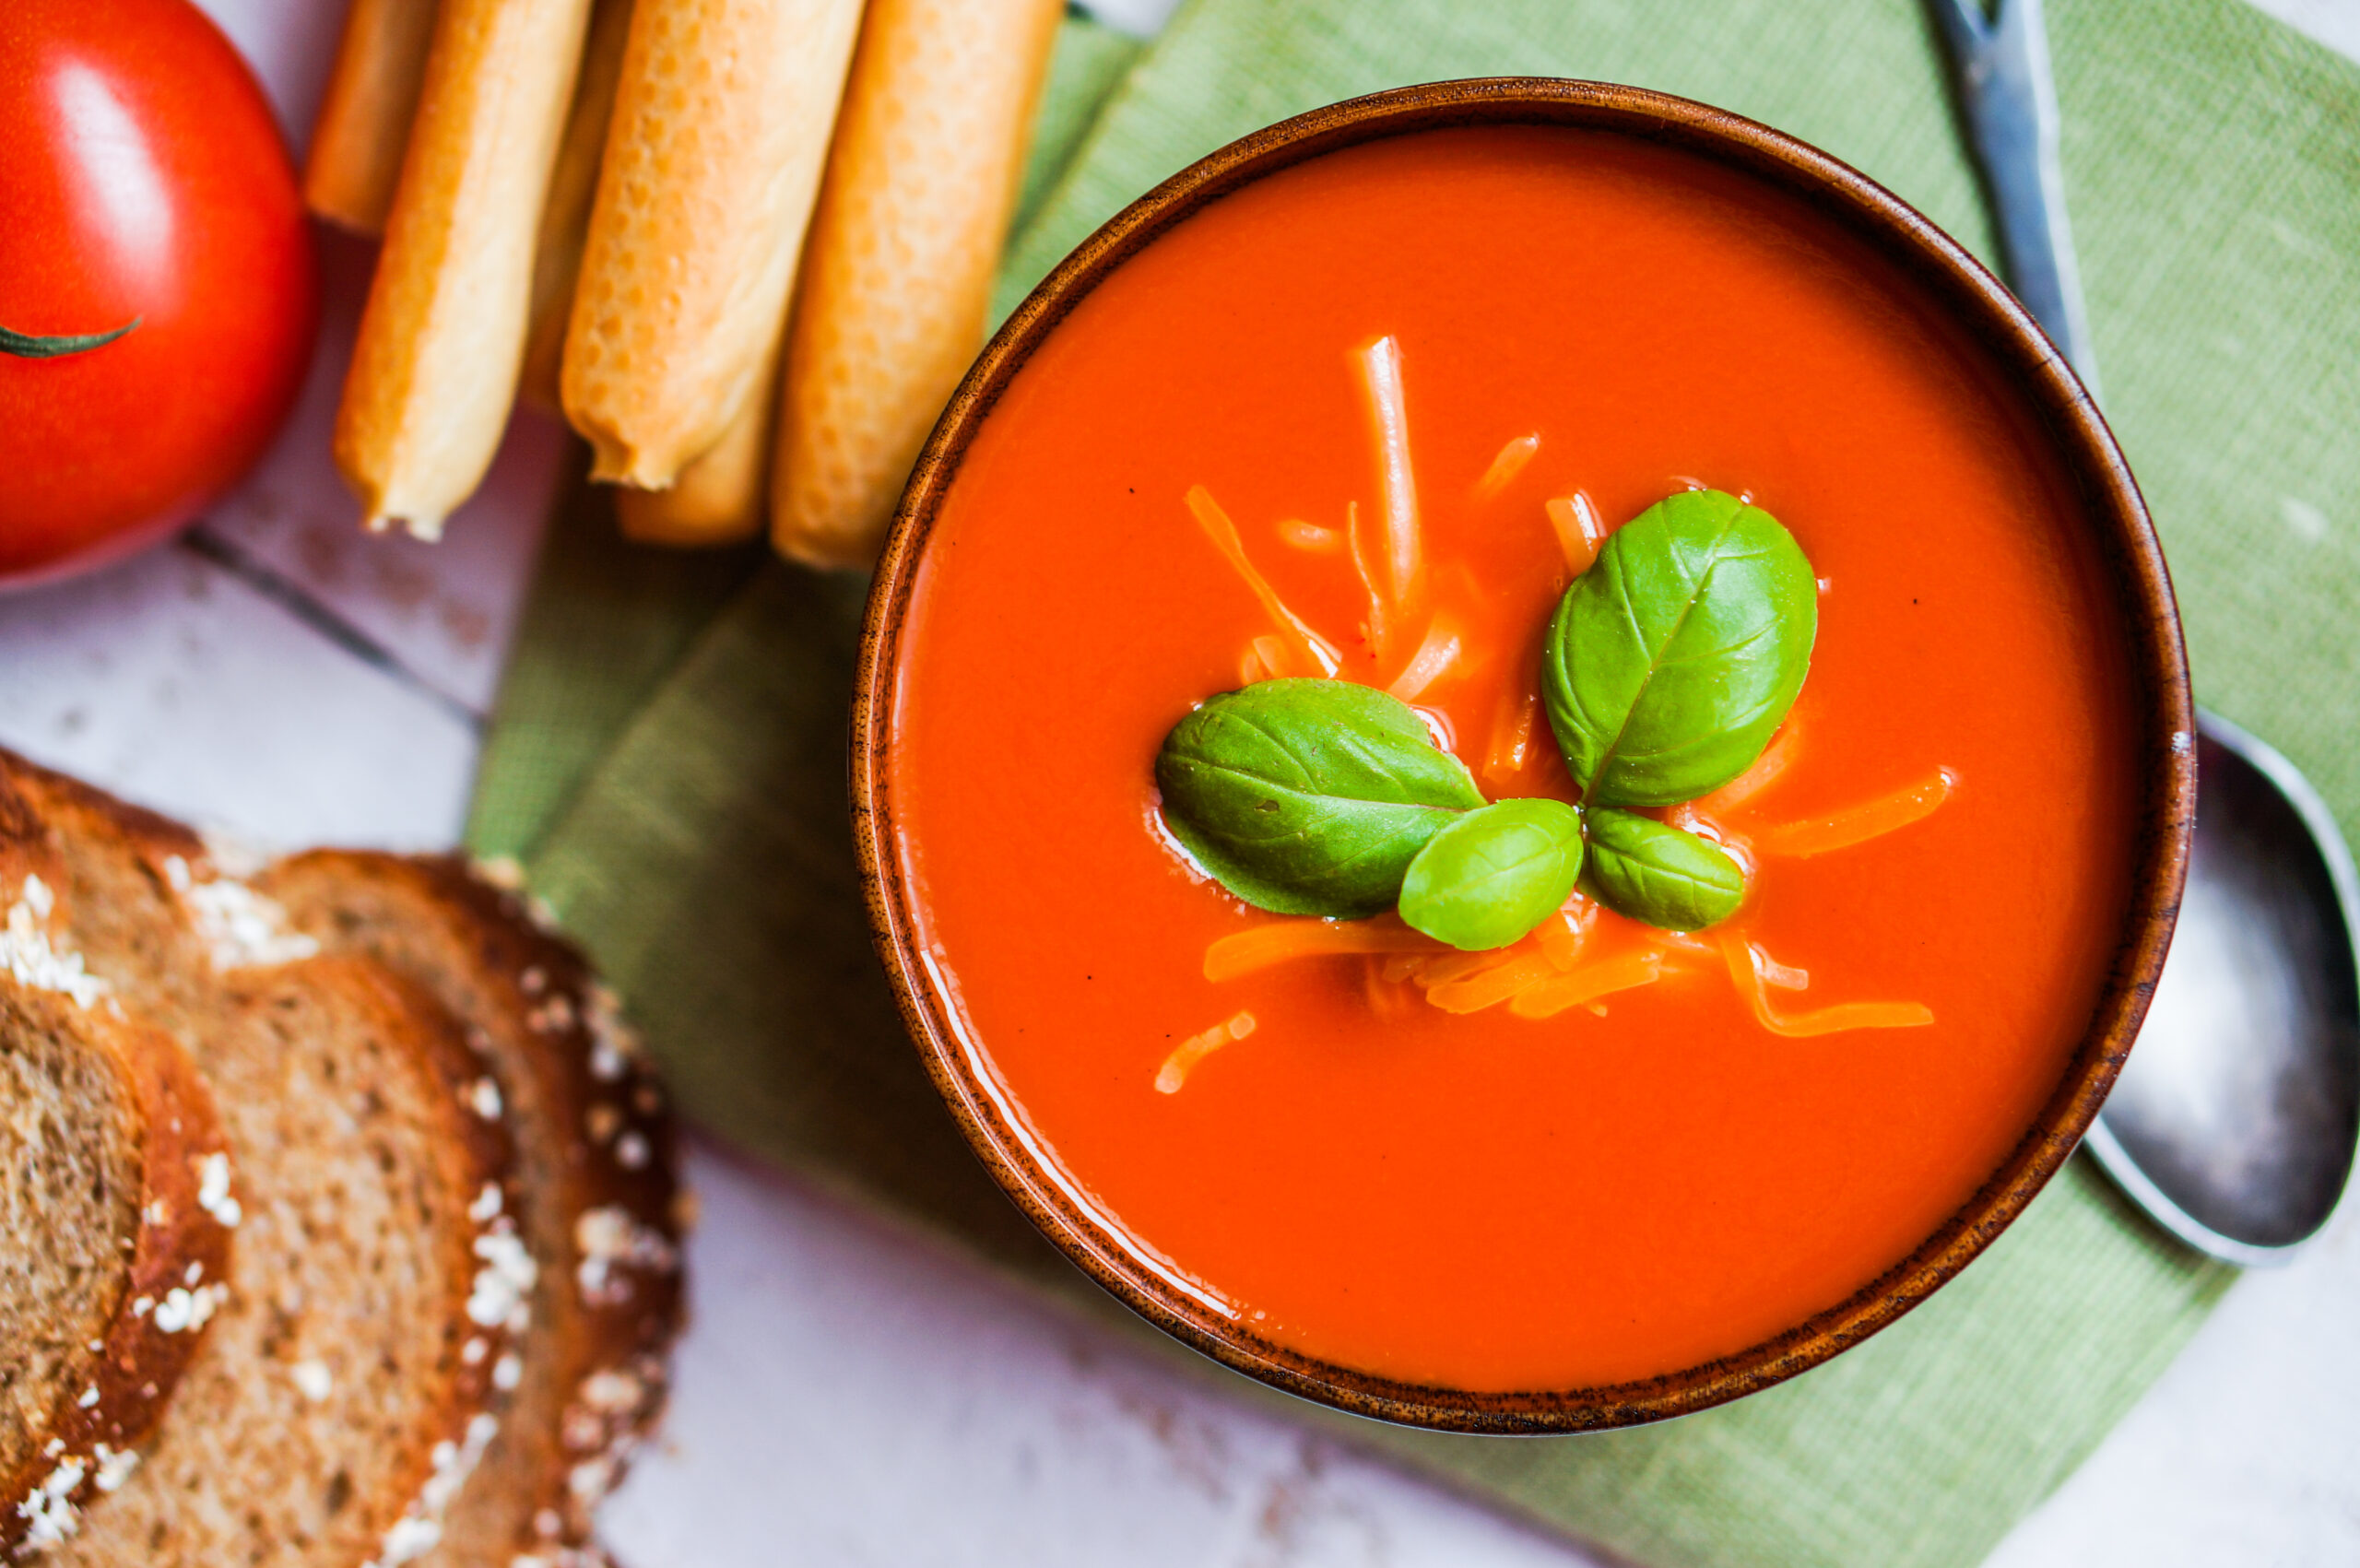 Tomatoe soup with bread sticks and basil on wooden background